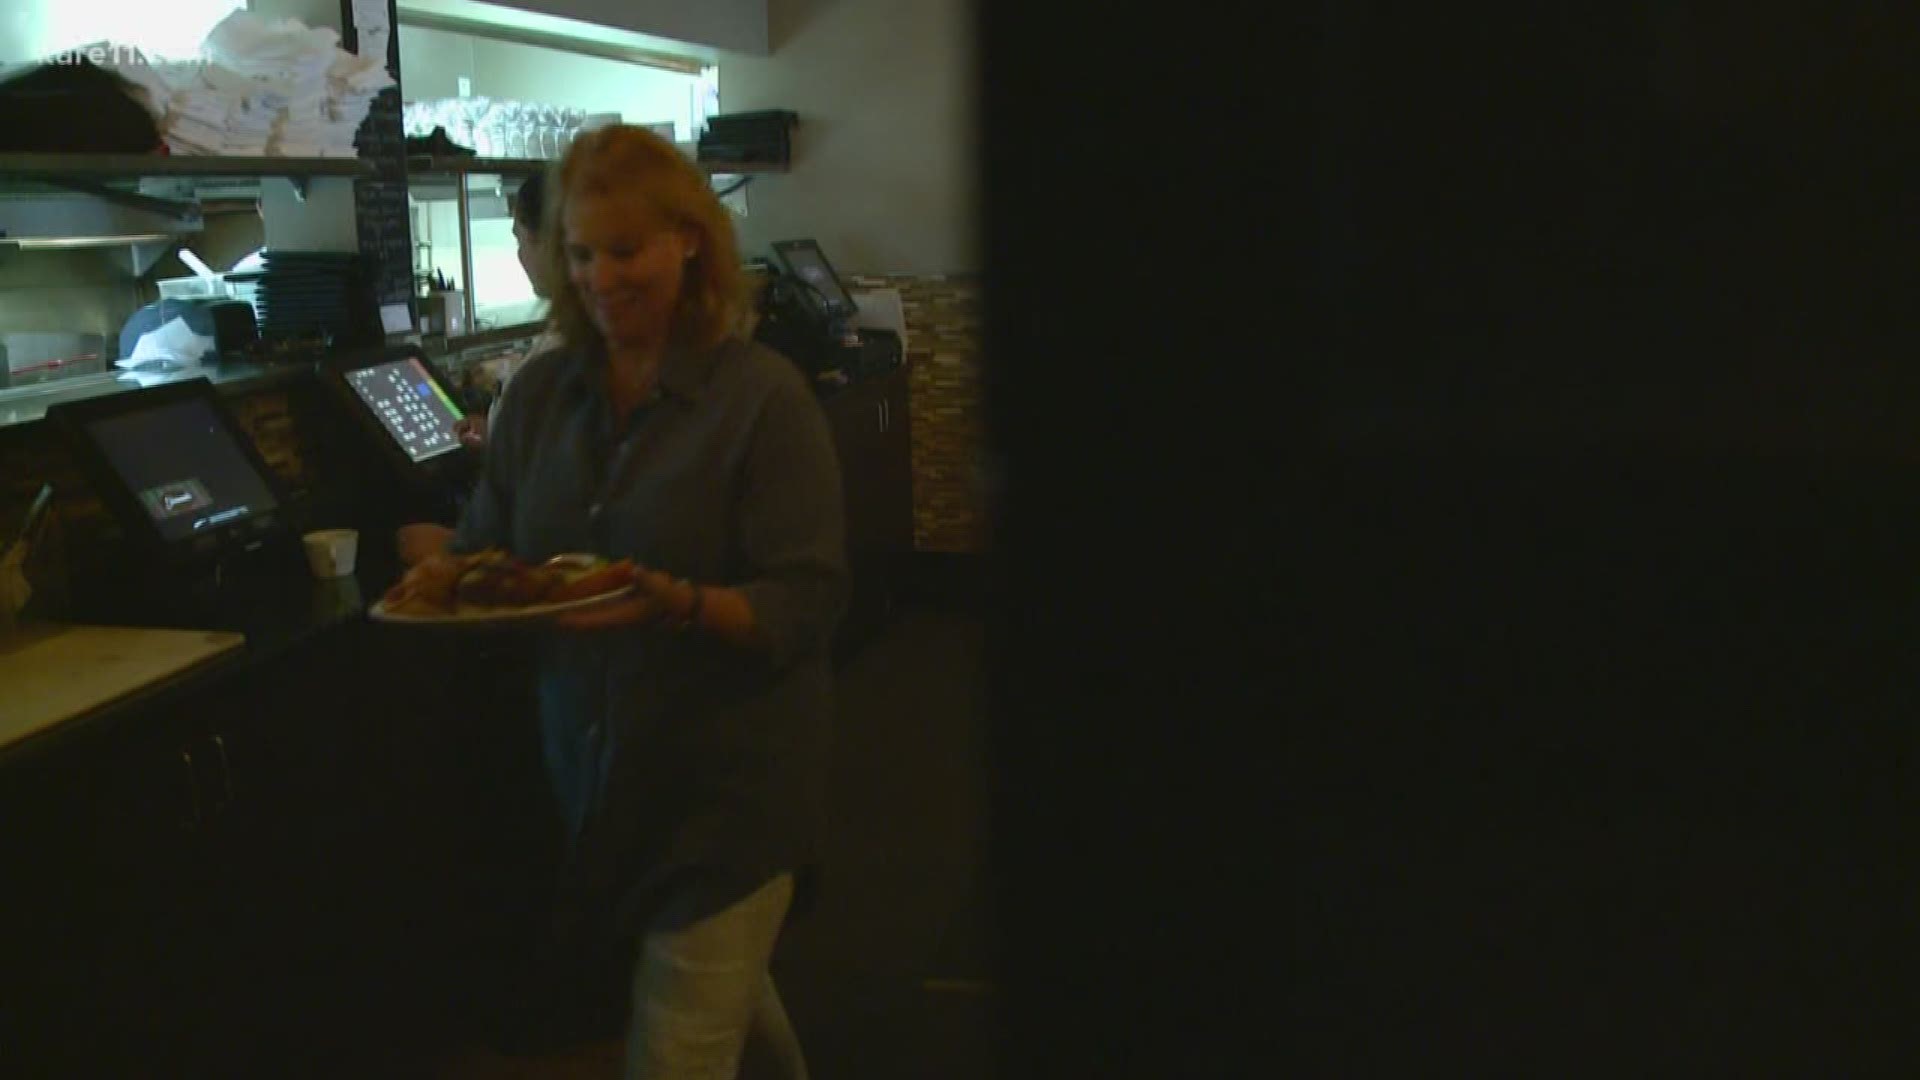 Huml heard her favorite Wayzata restaurant was going to close, so she followed a gut feeling to buy it and turn it around. https://kare11.tv/2ljikVX